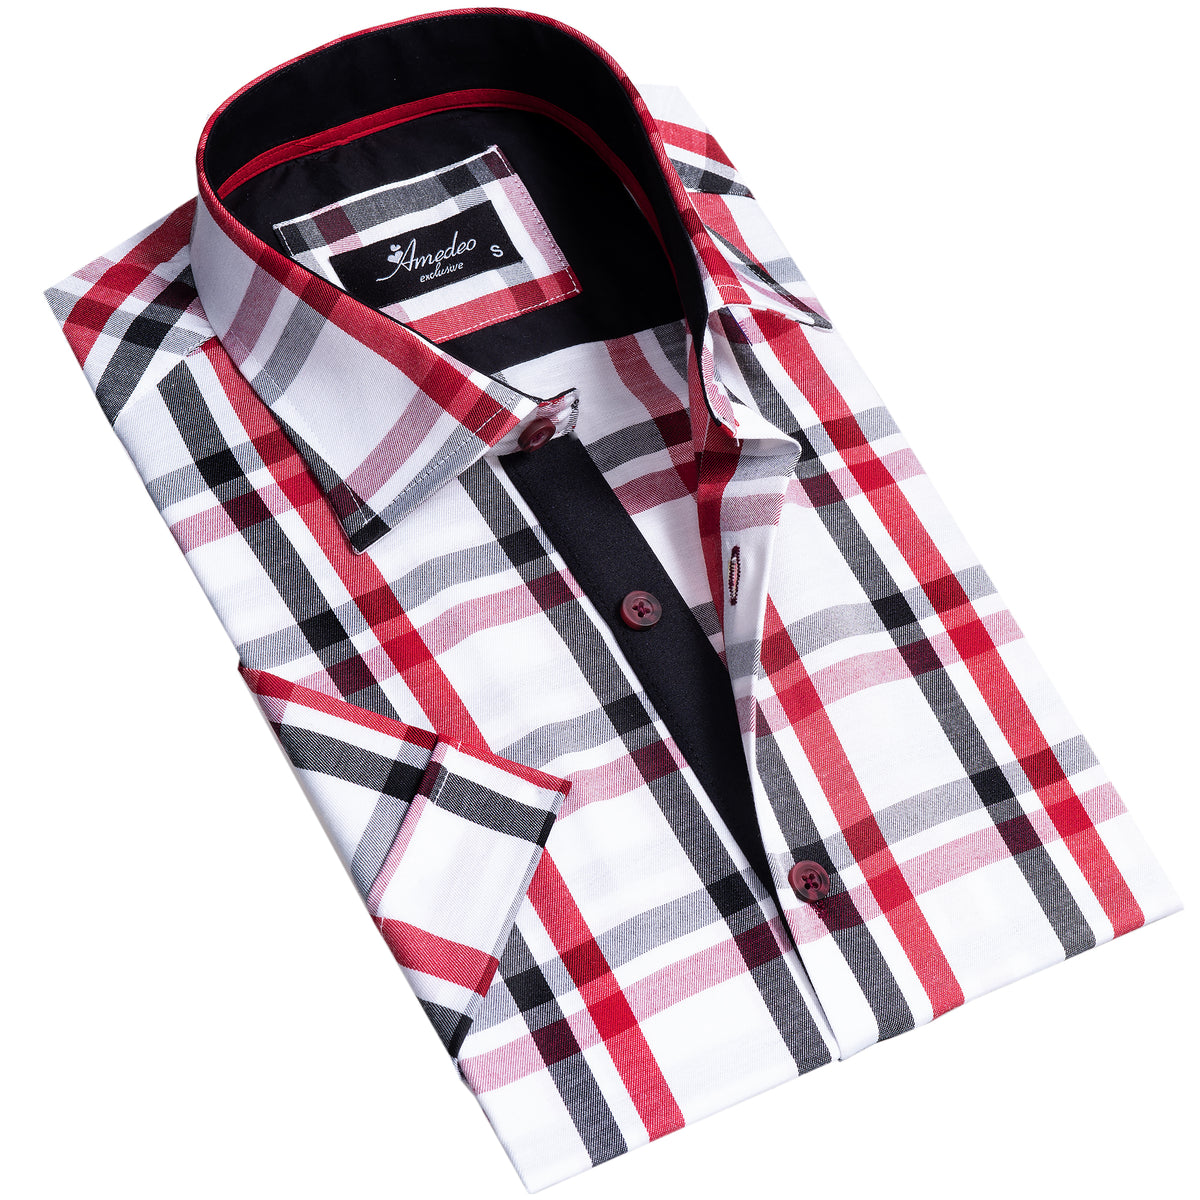 Red Black White Checkered Mens Short Sleeve Button up Shirts - Tailored Slim Fit Cotton Dress Shirts